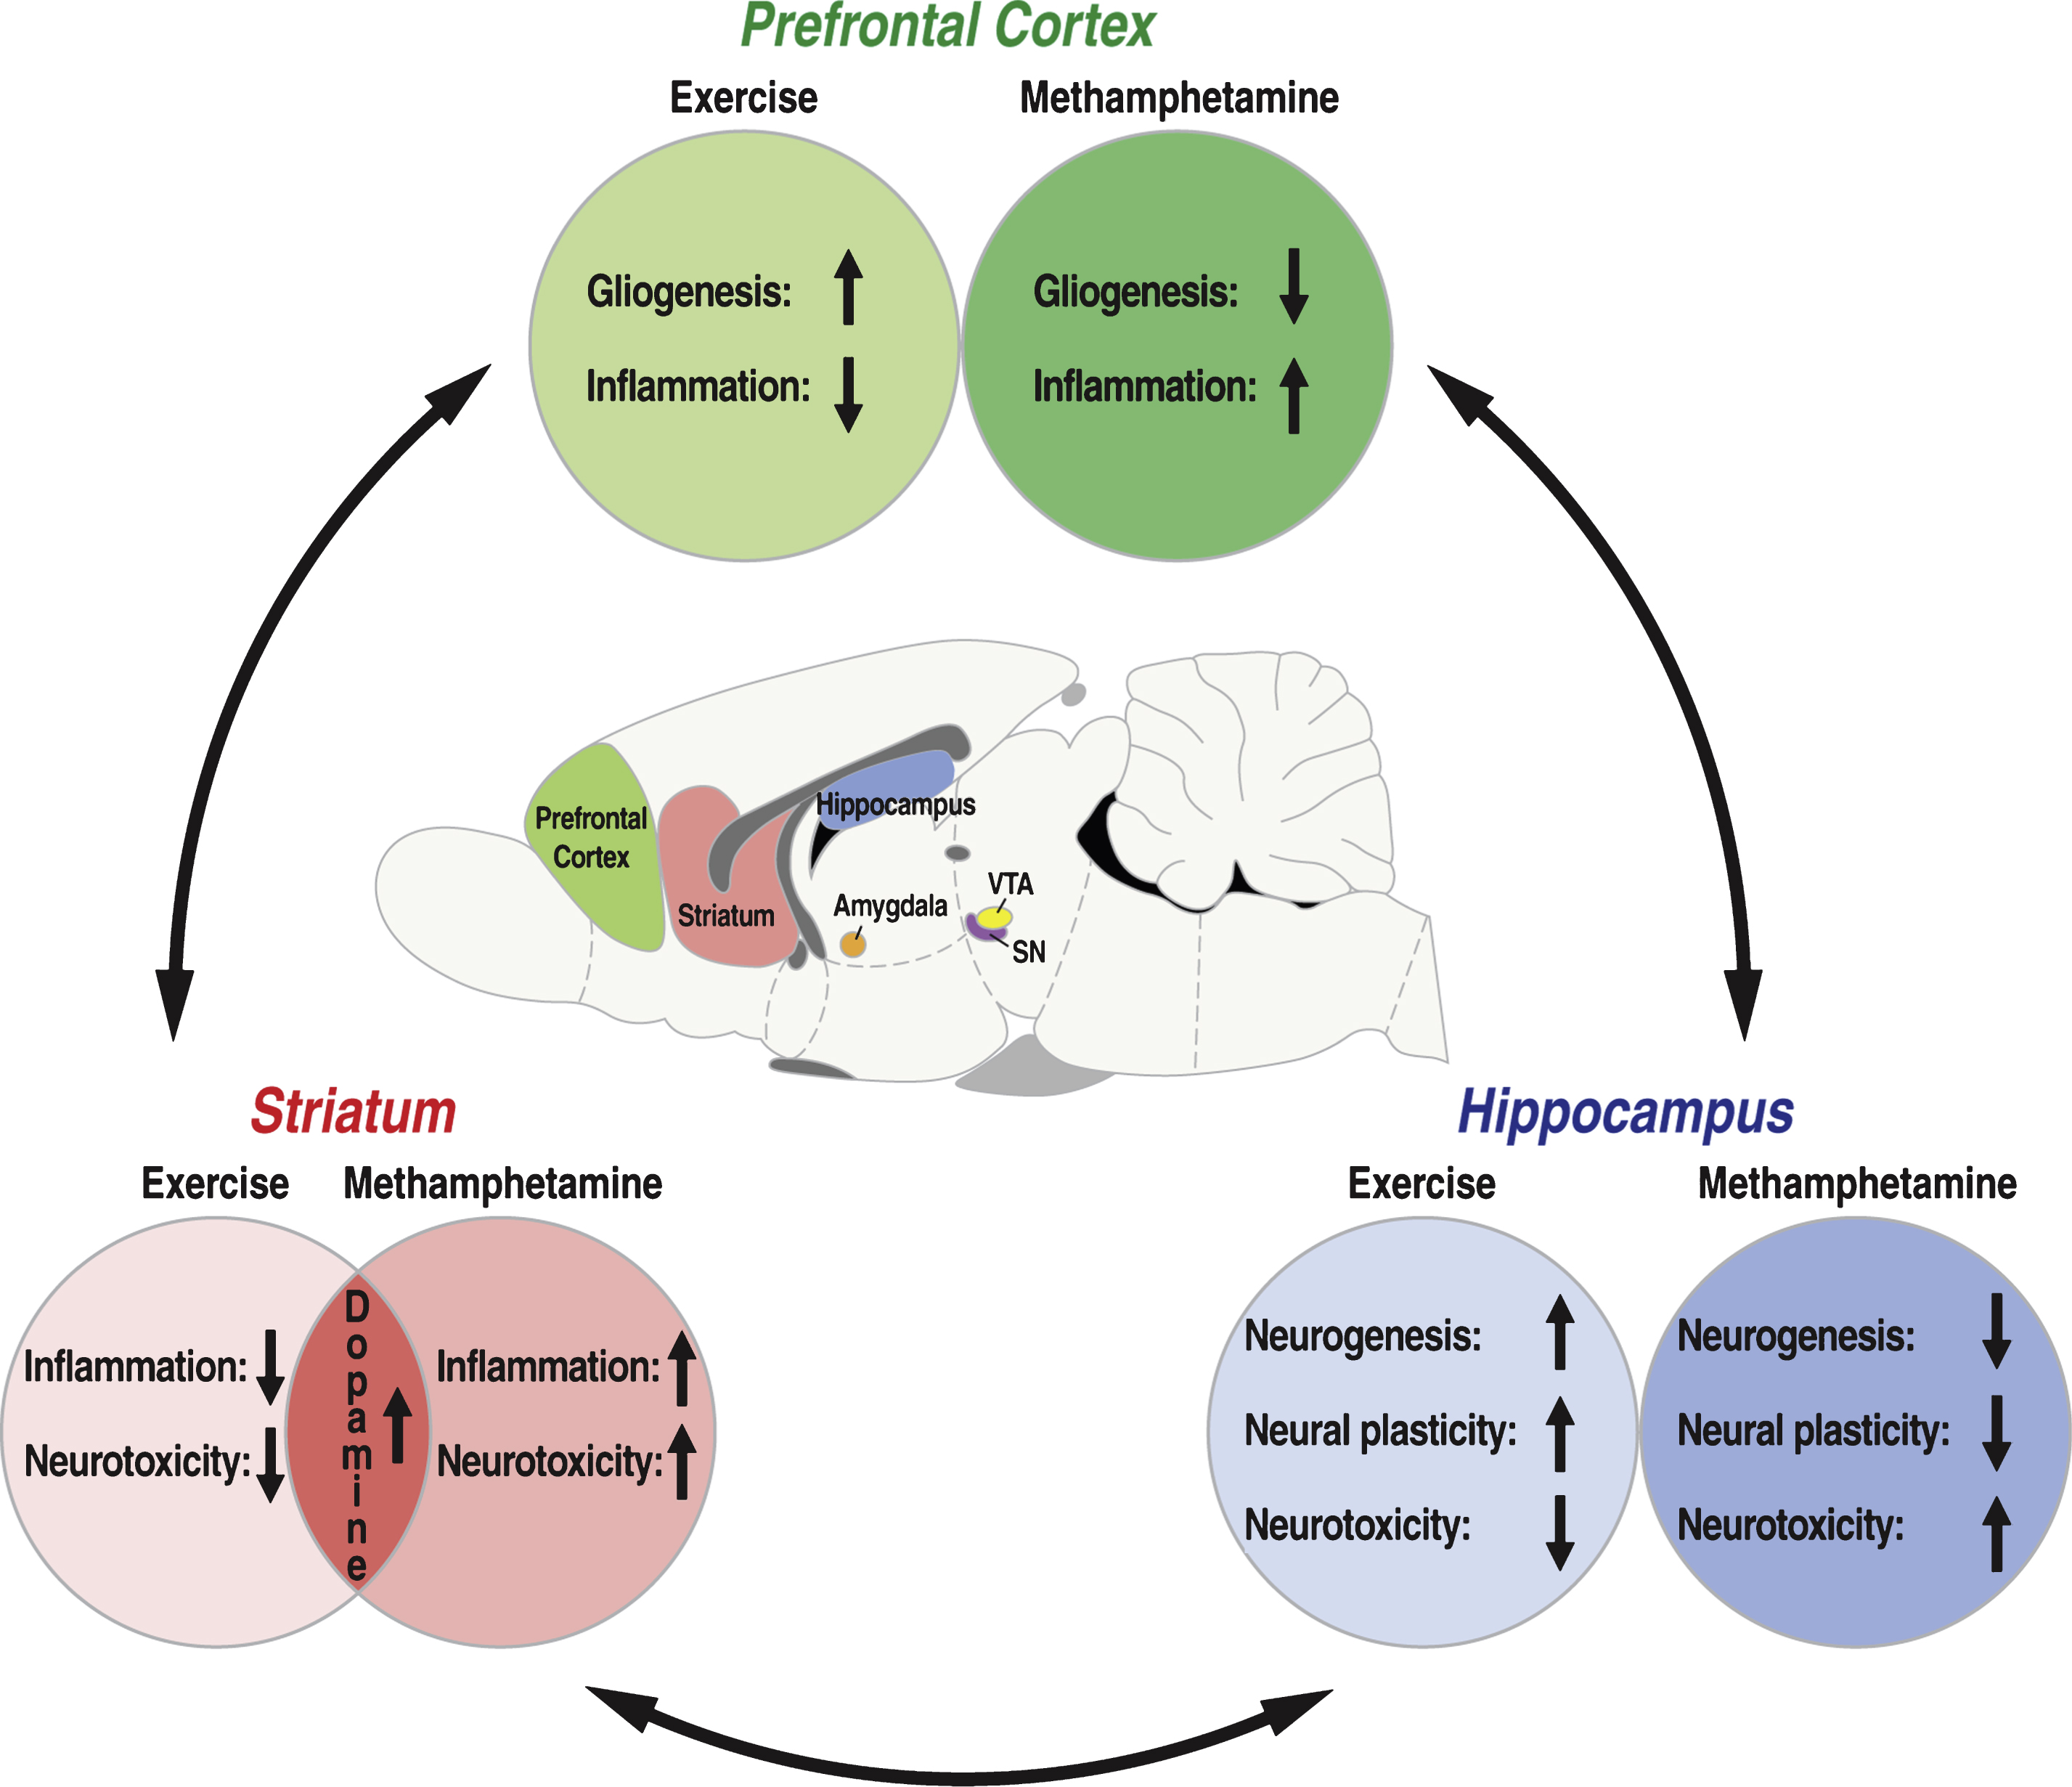 Neurobiological Overlap of Methamphetamine and Exercise in the Adult Rodent Brain: A schematic for the overarching effects of methamphetamine and exercise on the reward, reinforcement and motivational centers of the adult rodent brain, particularly the prefrontal cortex (highlighted in green), the hippocampus (highlighted in blue), and striatum (highlighted in pink).